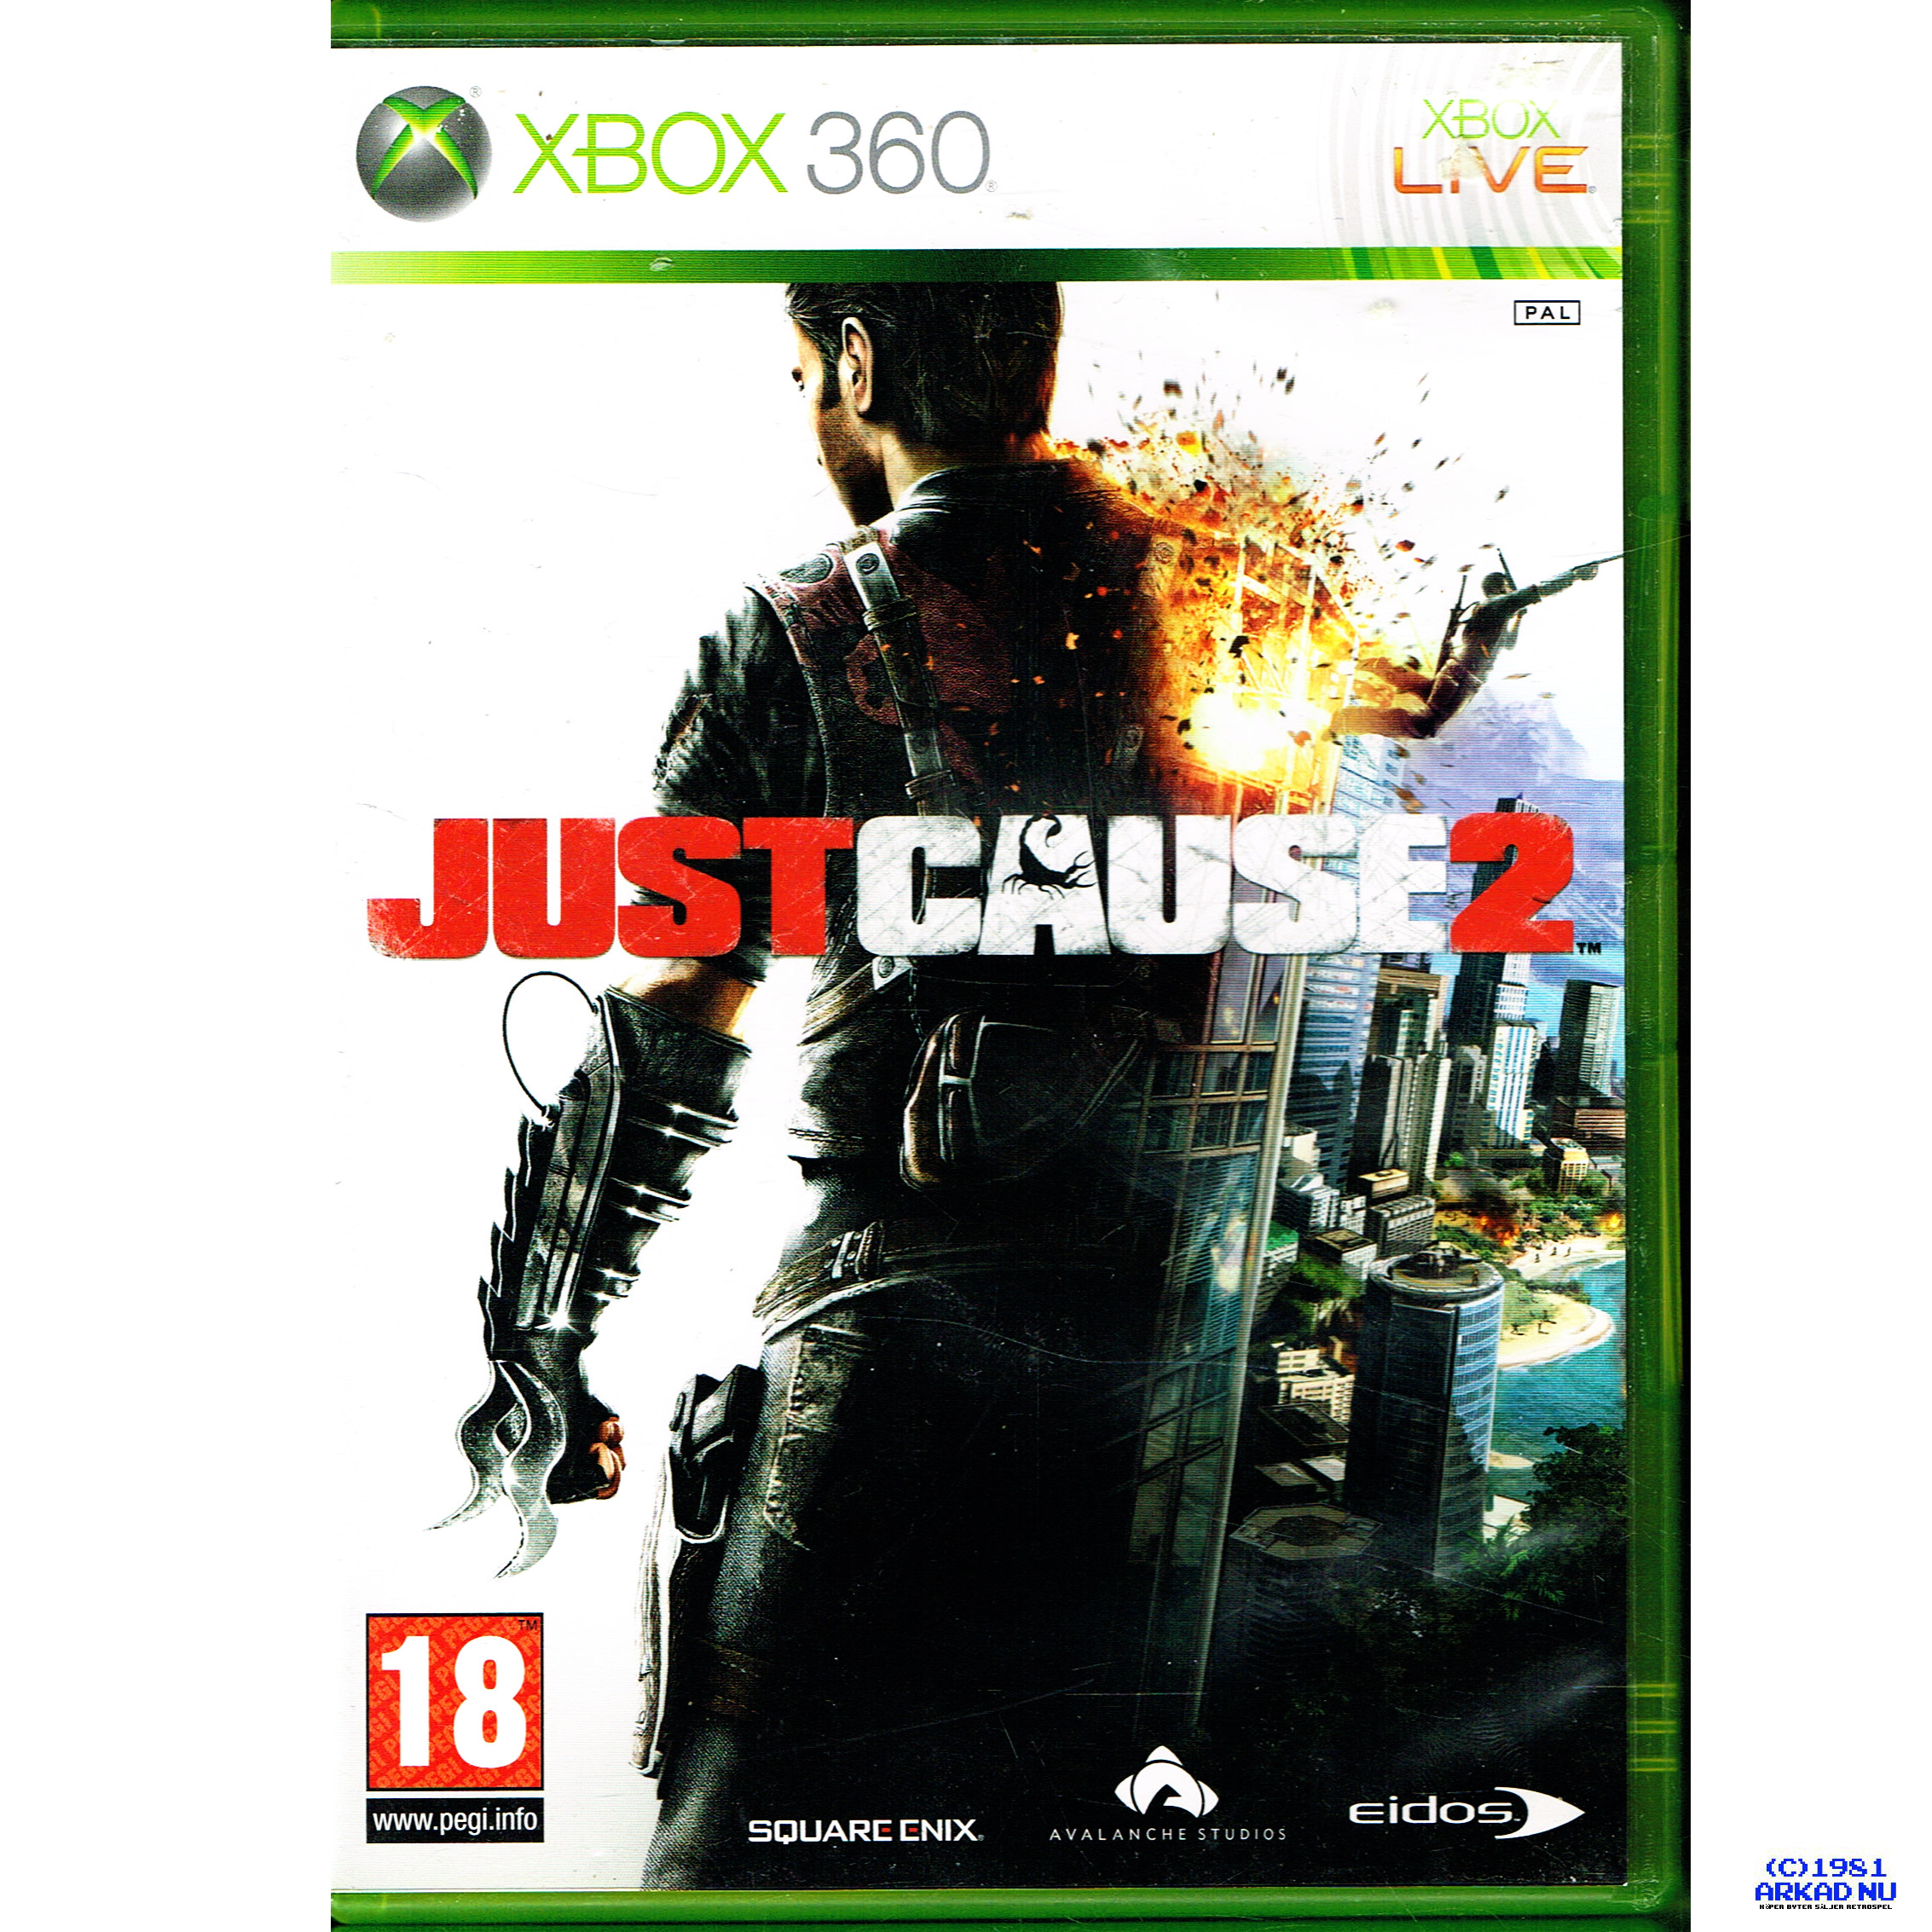 JUST CAUSE 2 XBOX 360